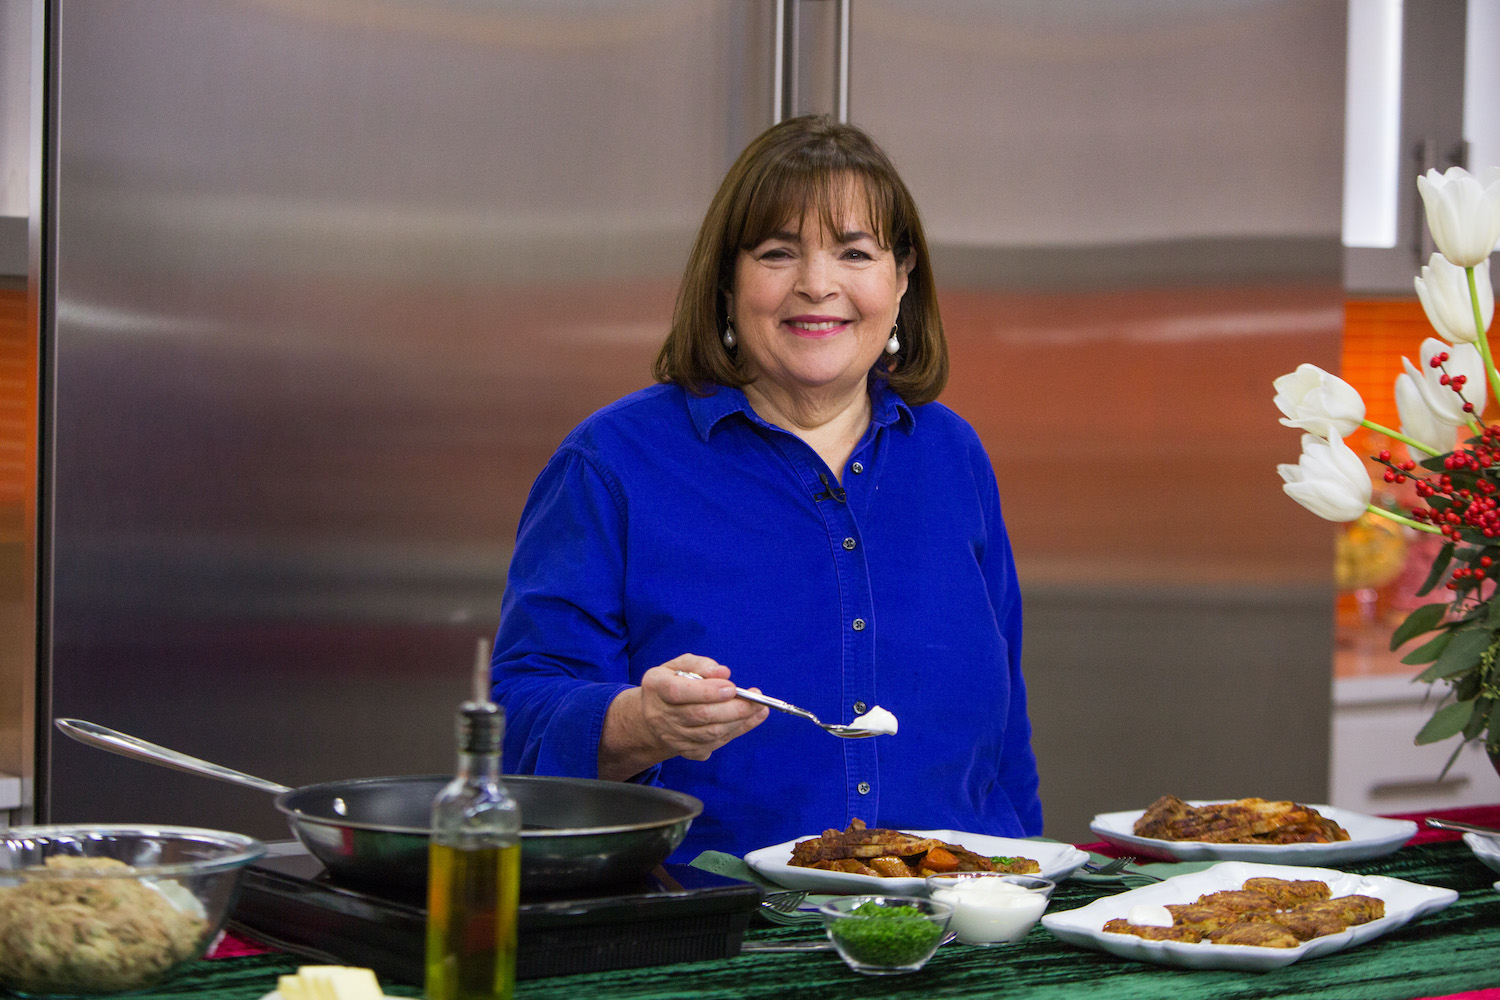 Ina Garten on the Today show